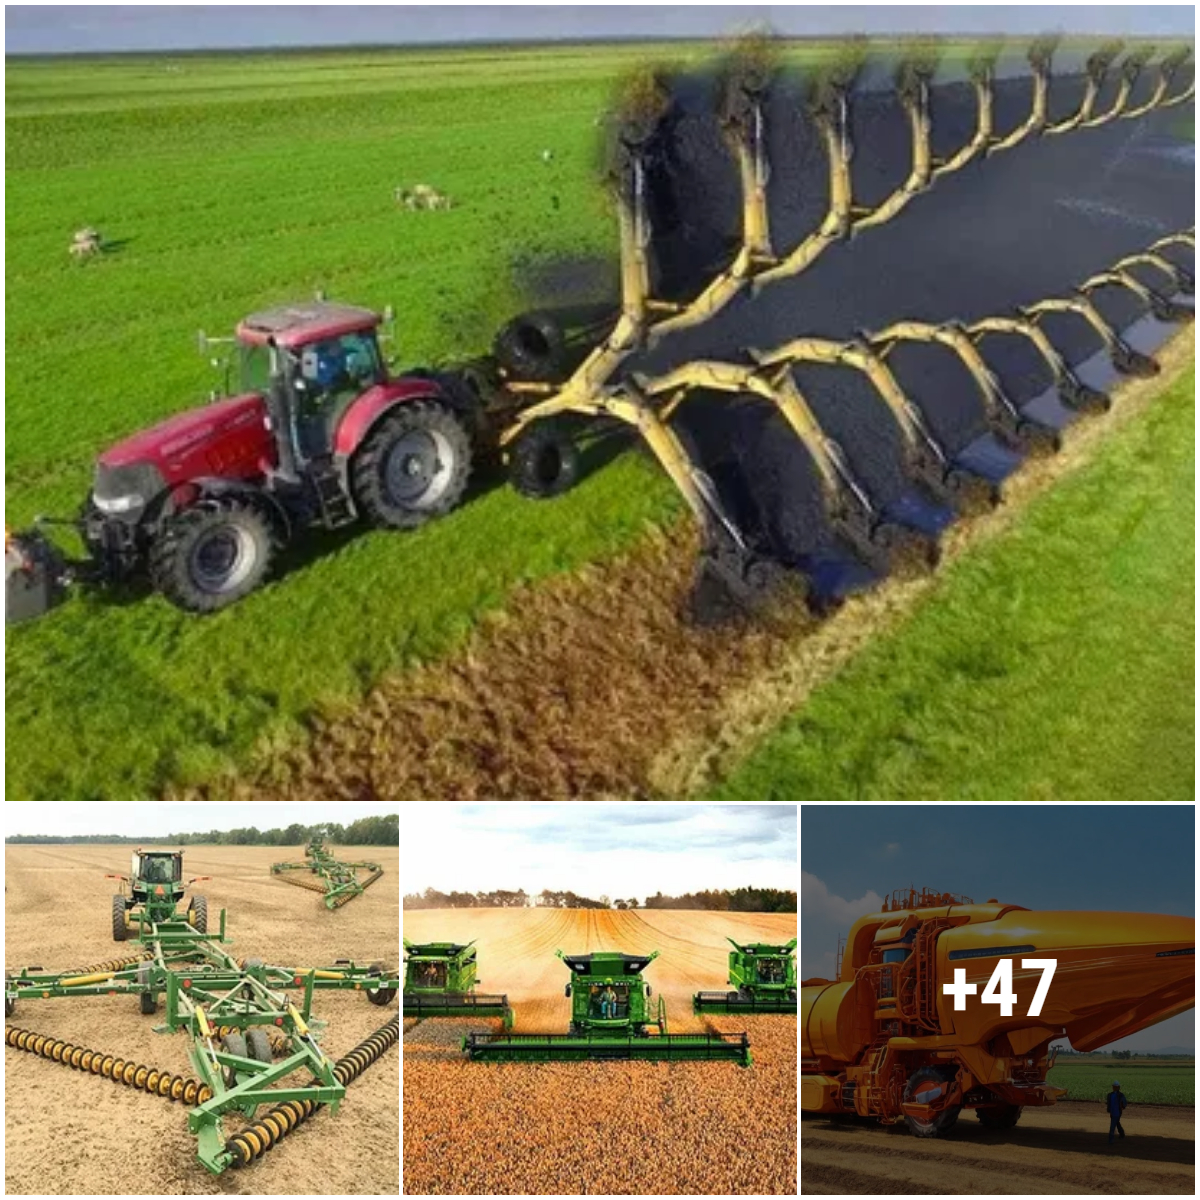 Horticulture has reached new heights thanks to remarkable advances in agricultural equipment.